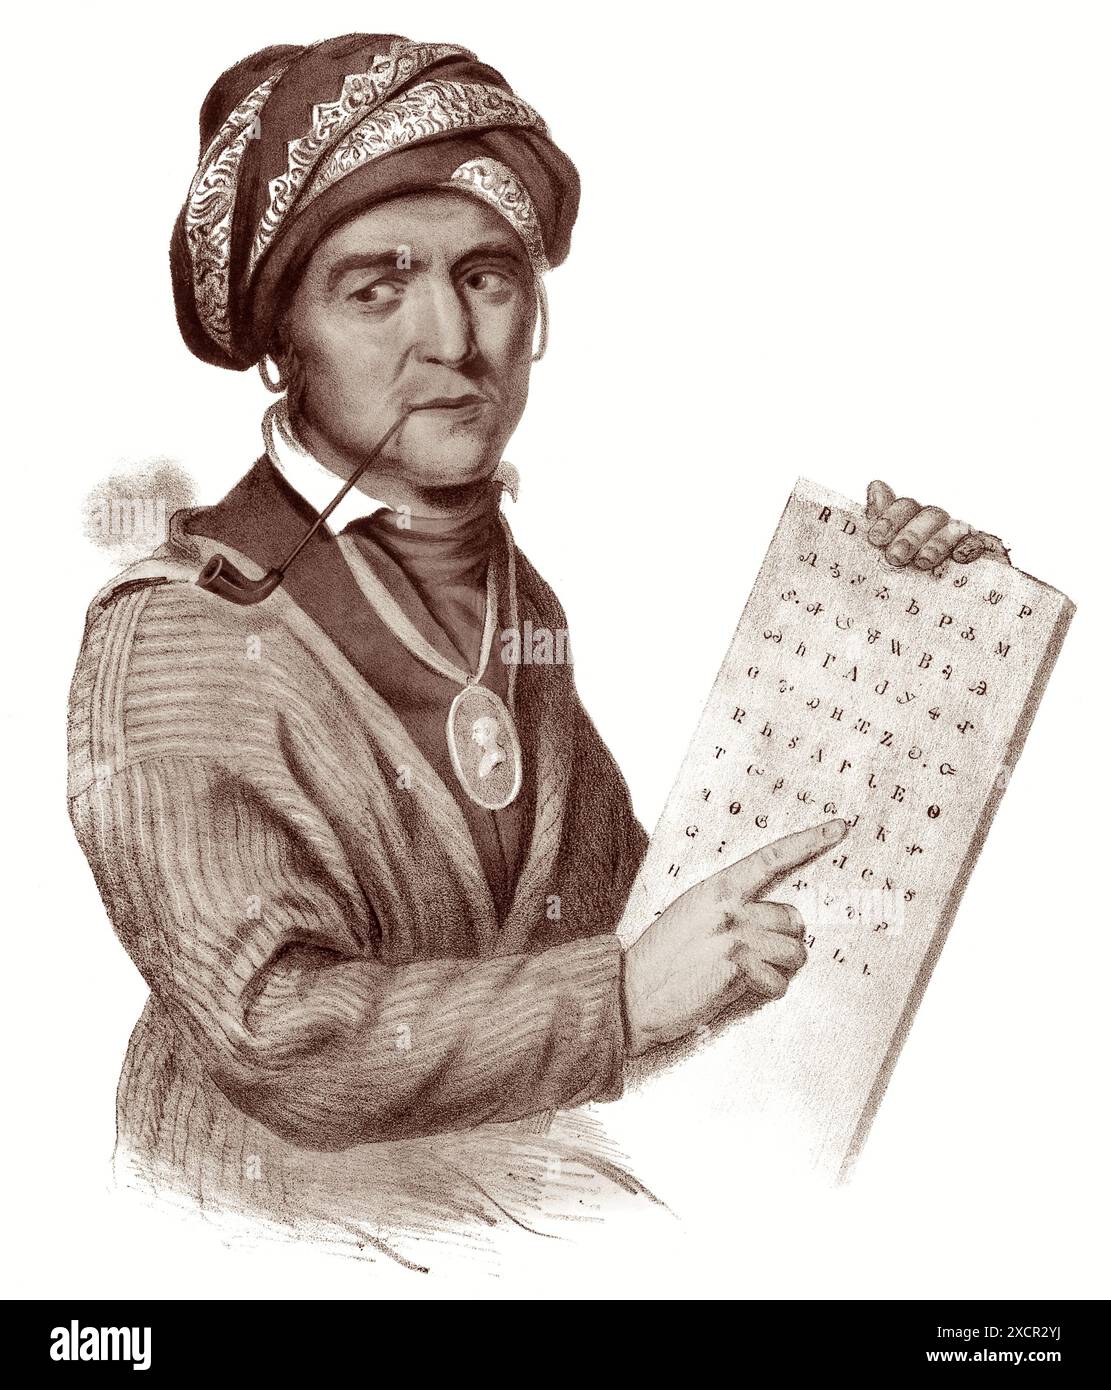 Sequoyah (c1770–1843), son of a Cherokee woman and a fur trader from Virginia, was a warrior, hunter, and silversmith who for twelve years worked to devise a method of writing for the Cherokee language. (From a hand  colored lithograph, 1837, after an earlier portrait by Charles Bird King which was destroyed in the Smithsonian Castle fire of 1865.) Stock Photo